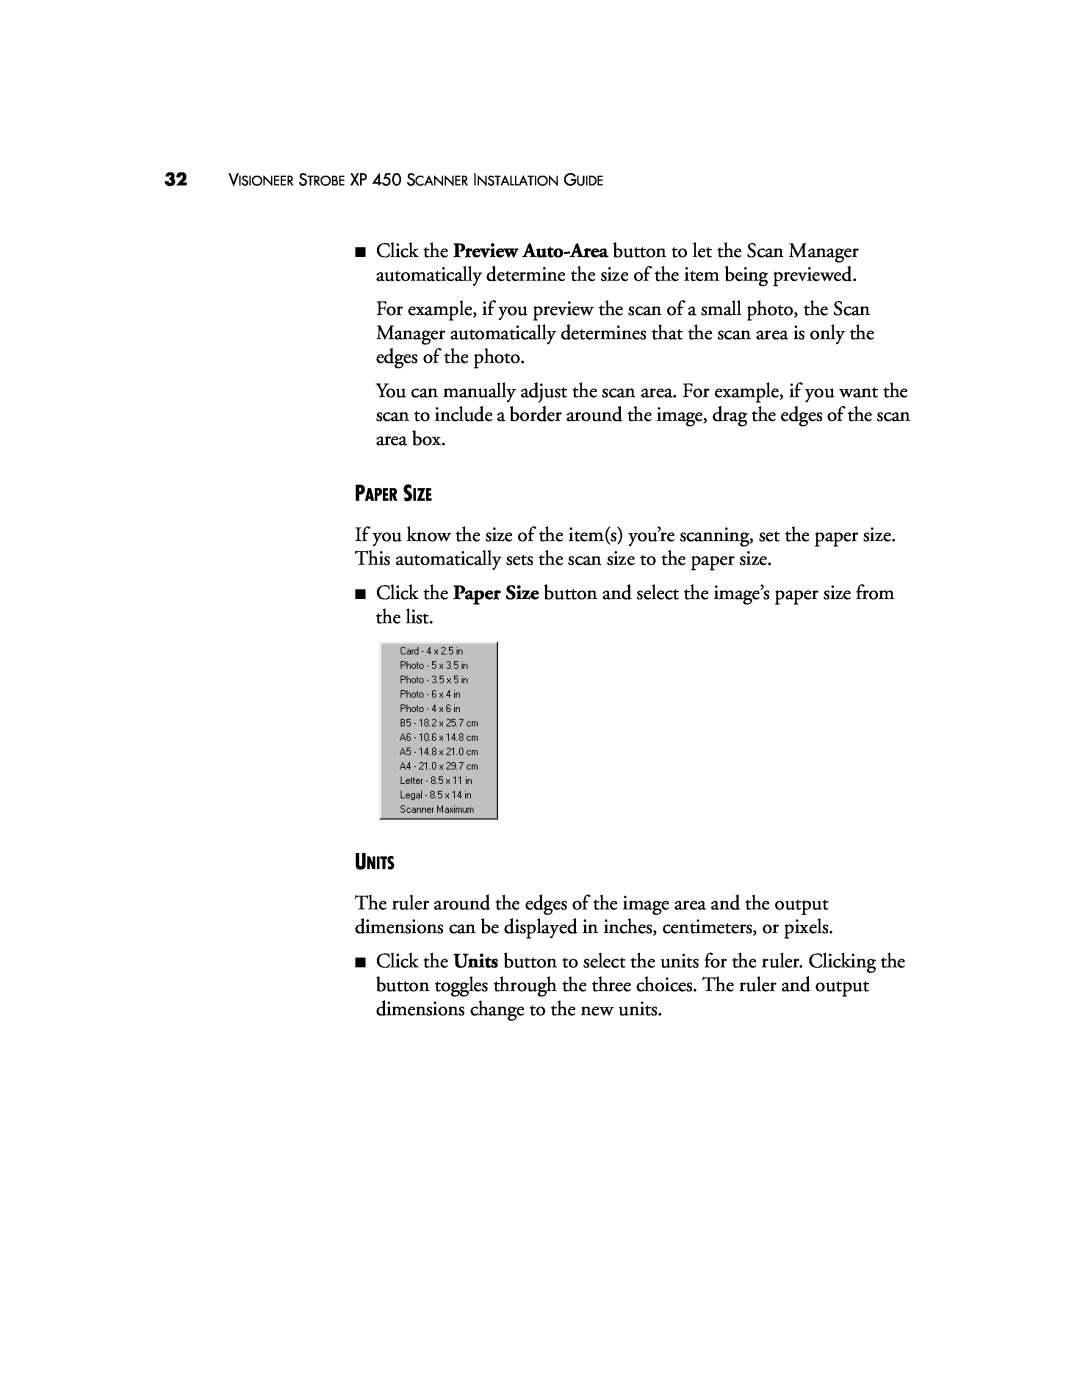 Visioneer XP 450 manual If you know the size of the items you’re scanning, set the paper size 